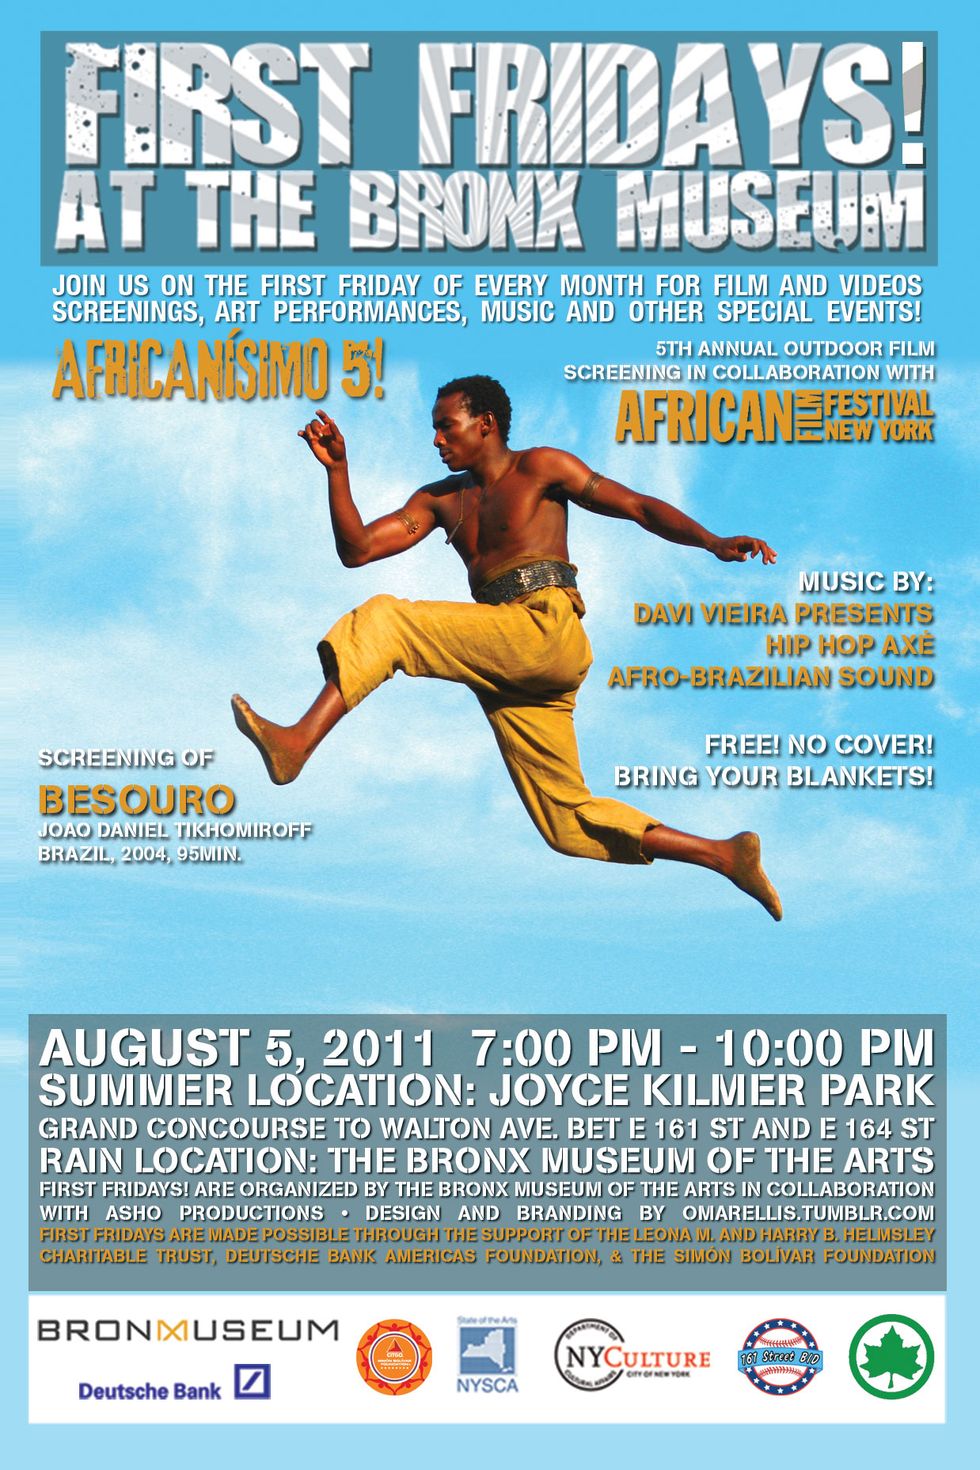 NYC: First Fridays! At The Bronx Museum With The African Film Festival